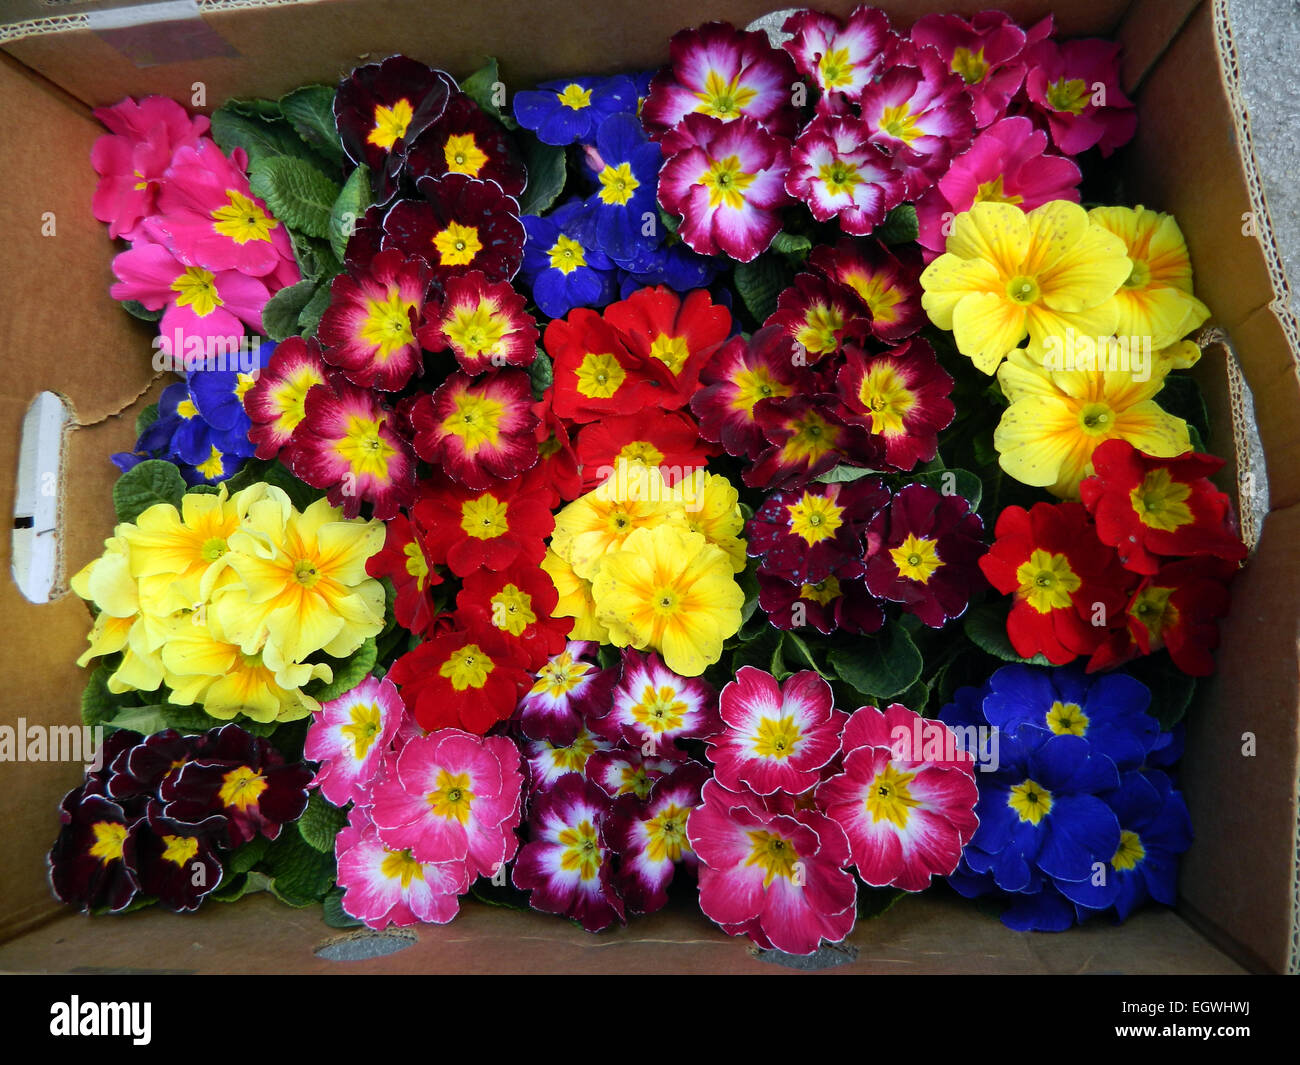 A larger quantity of early primrose flowers in a box at the local market and the announcement of the arrival of spring. Stock Photo